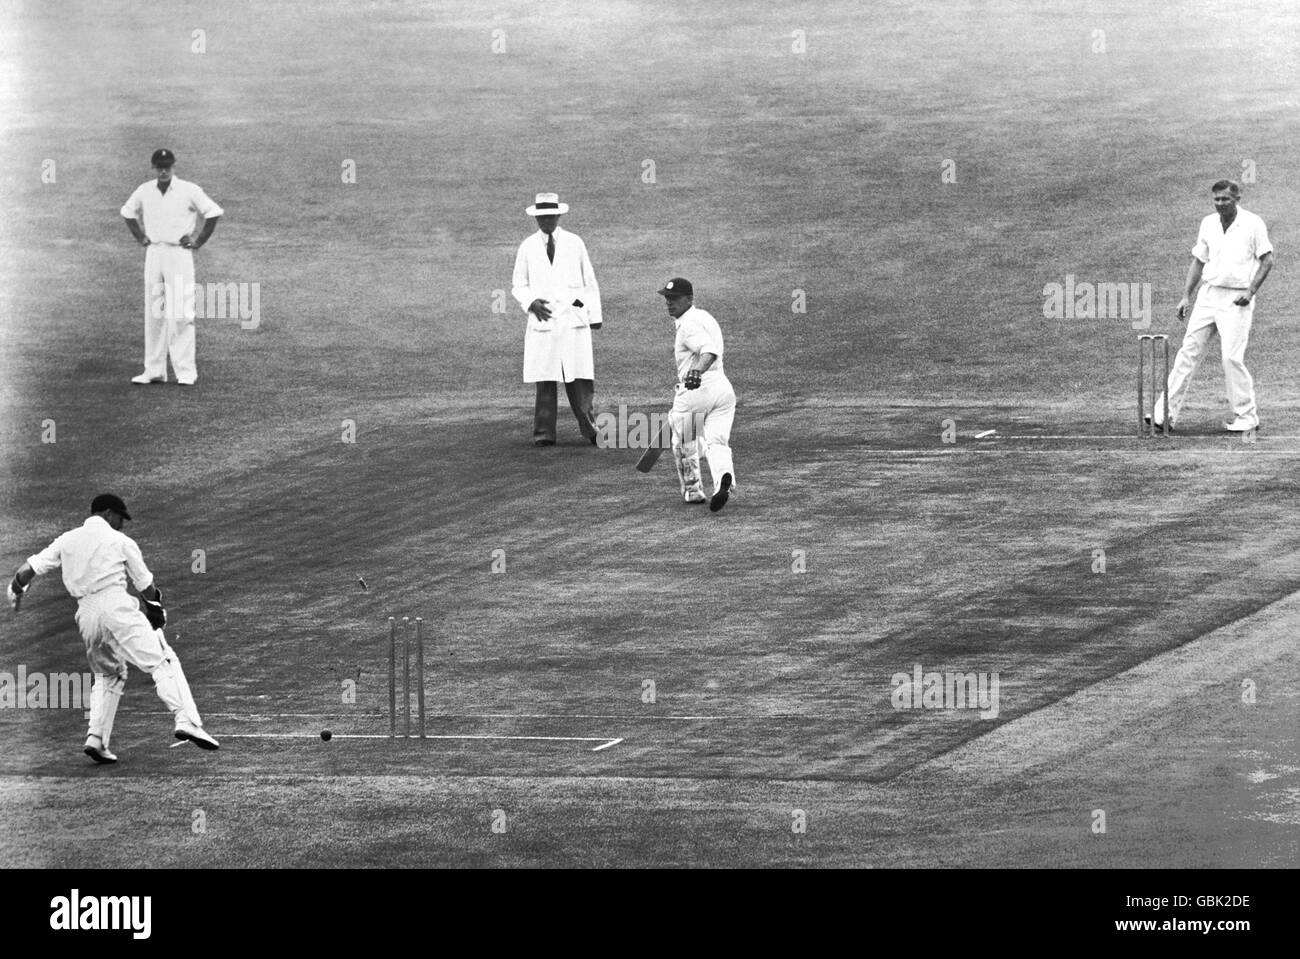 South Africa wicketkeeper Billy Wade (bottom l) breaks the wicket but fails to run out England's Jack Crapp (out of pic) as England's Cyril Washbrook (c) looks back anxiously. Looking on are South Africa's Fish Markham (top r) and Tufty Mann (top l) Stock Photo